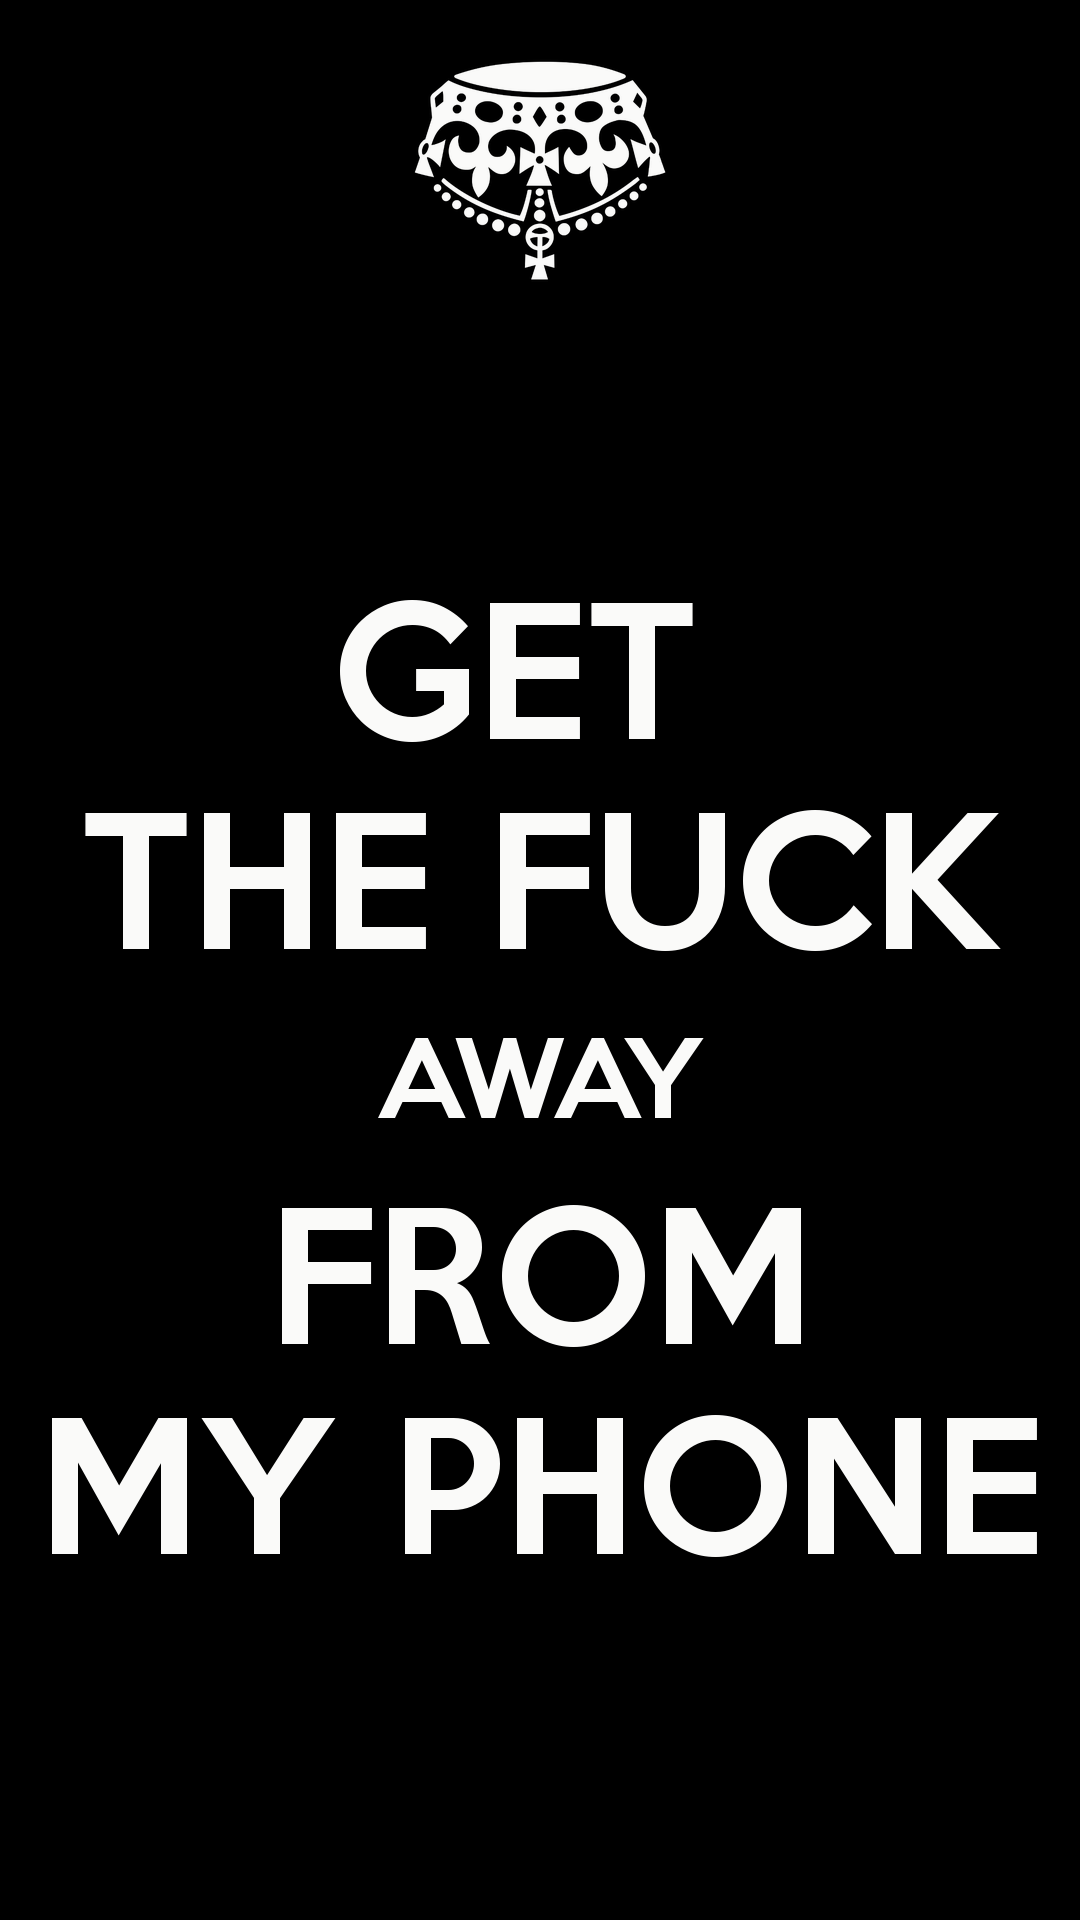 Get Fuck to see more funny locked phone wallpaper!